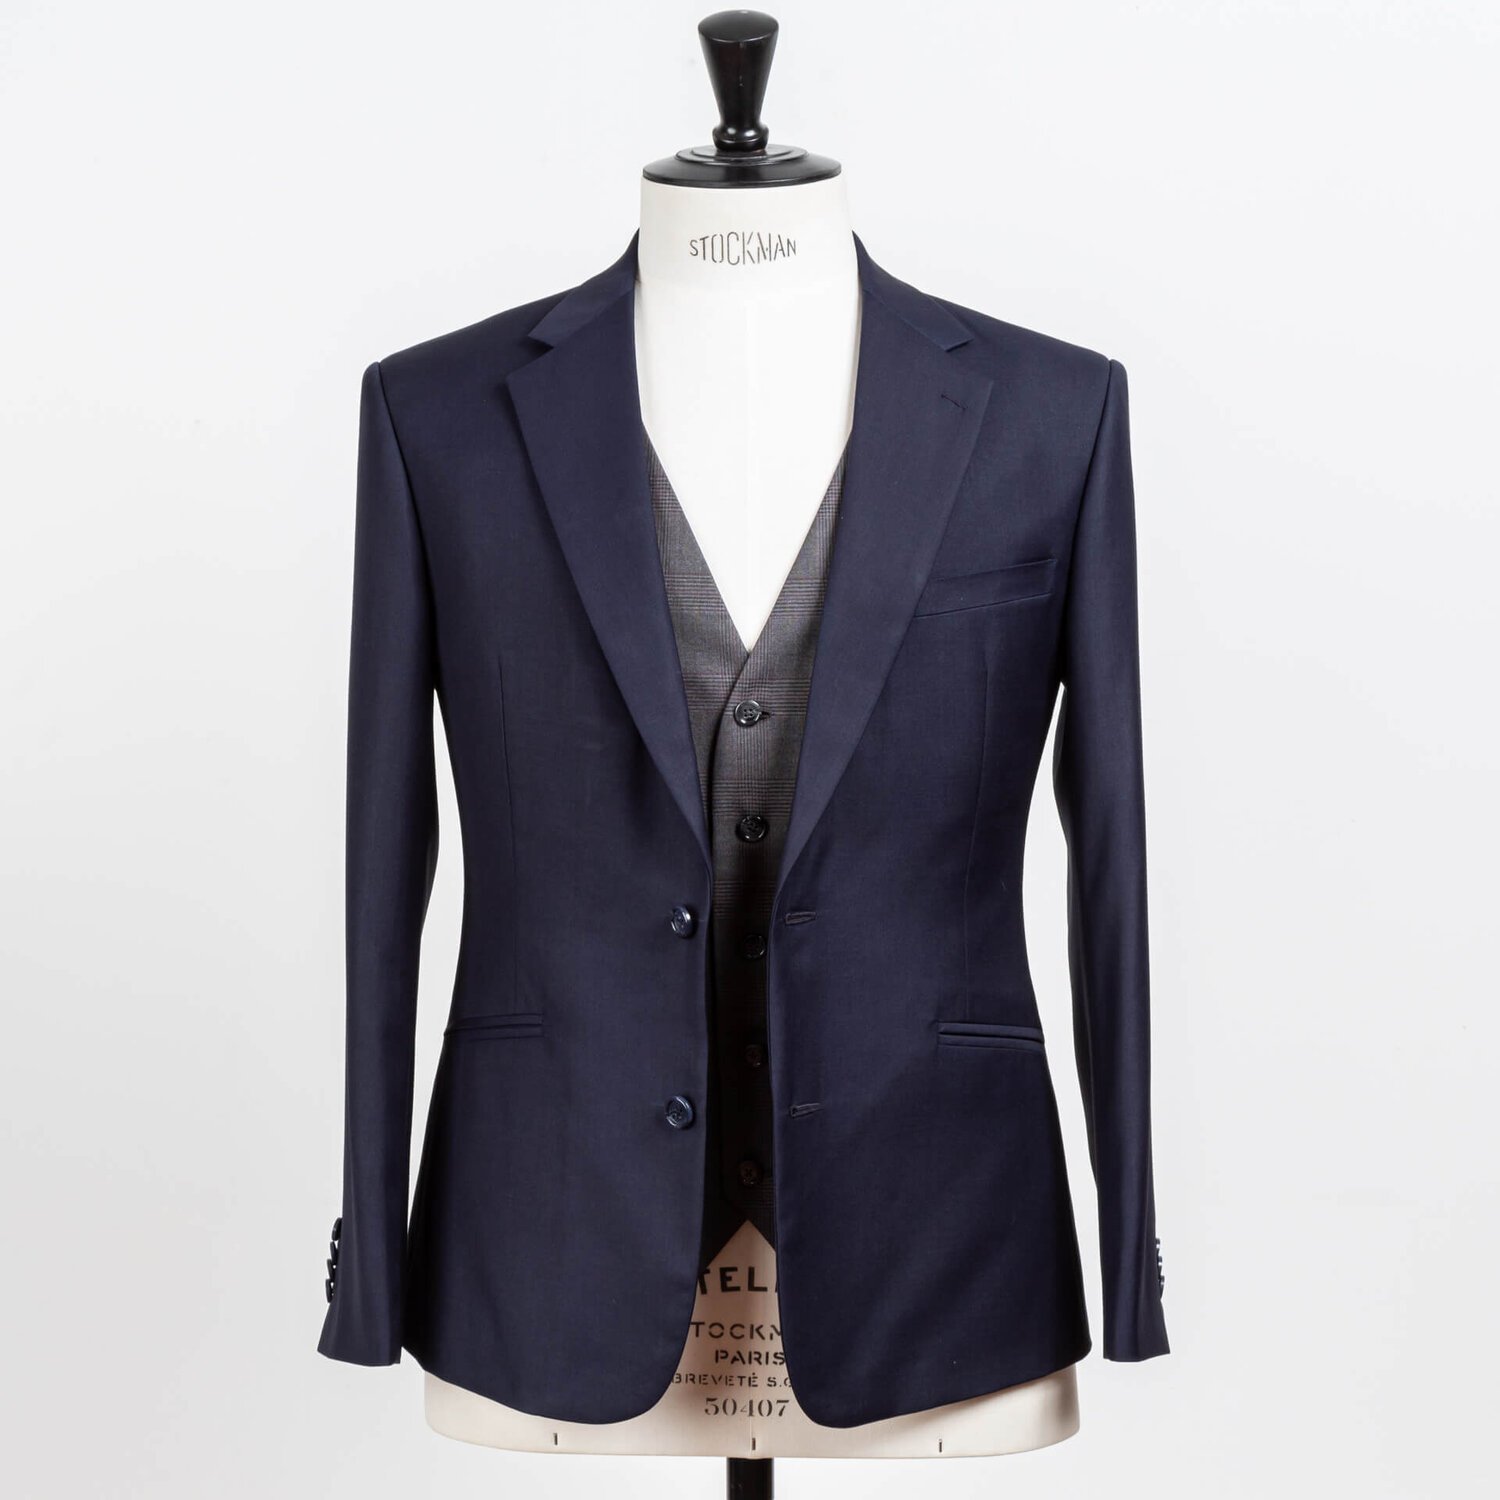 Boys' Navy Suit - Classic Slim Fit for a Modern Look | Malcolm Royce